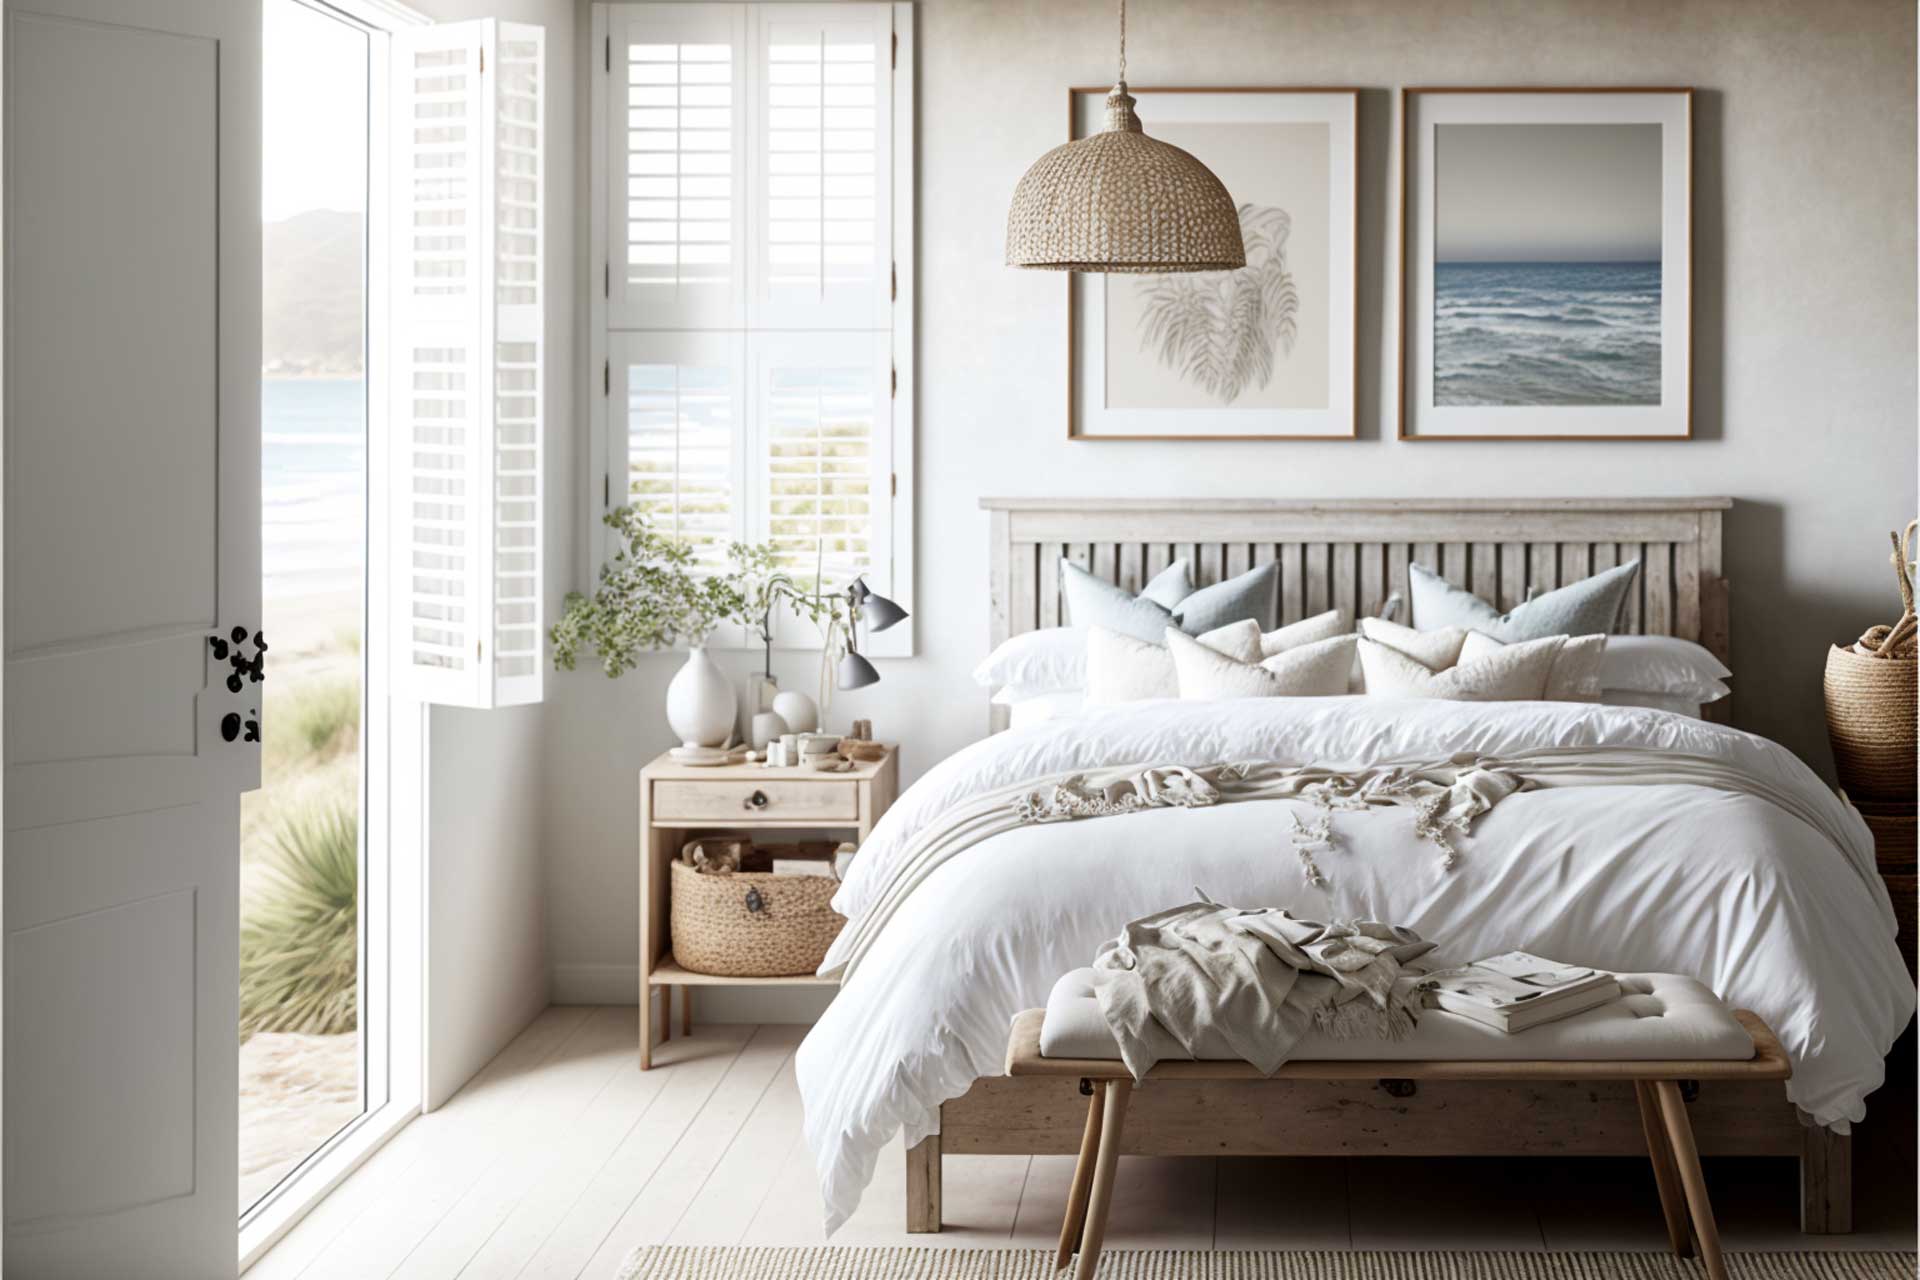 A Minimalist Bedroom With A Relaxing Beach Vibe